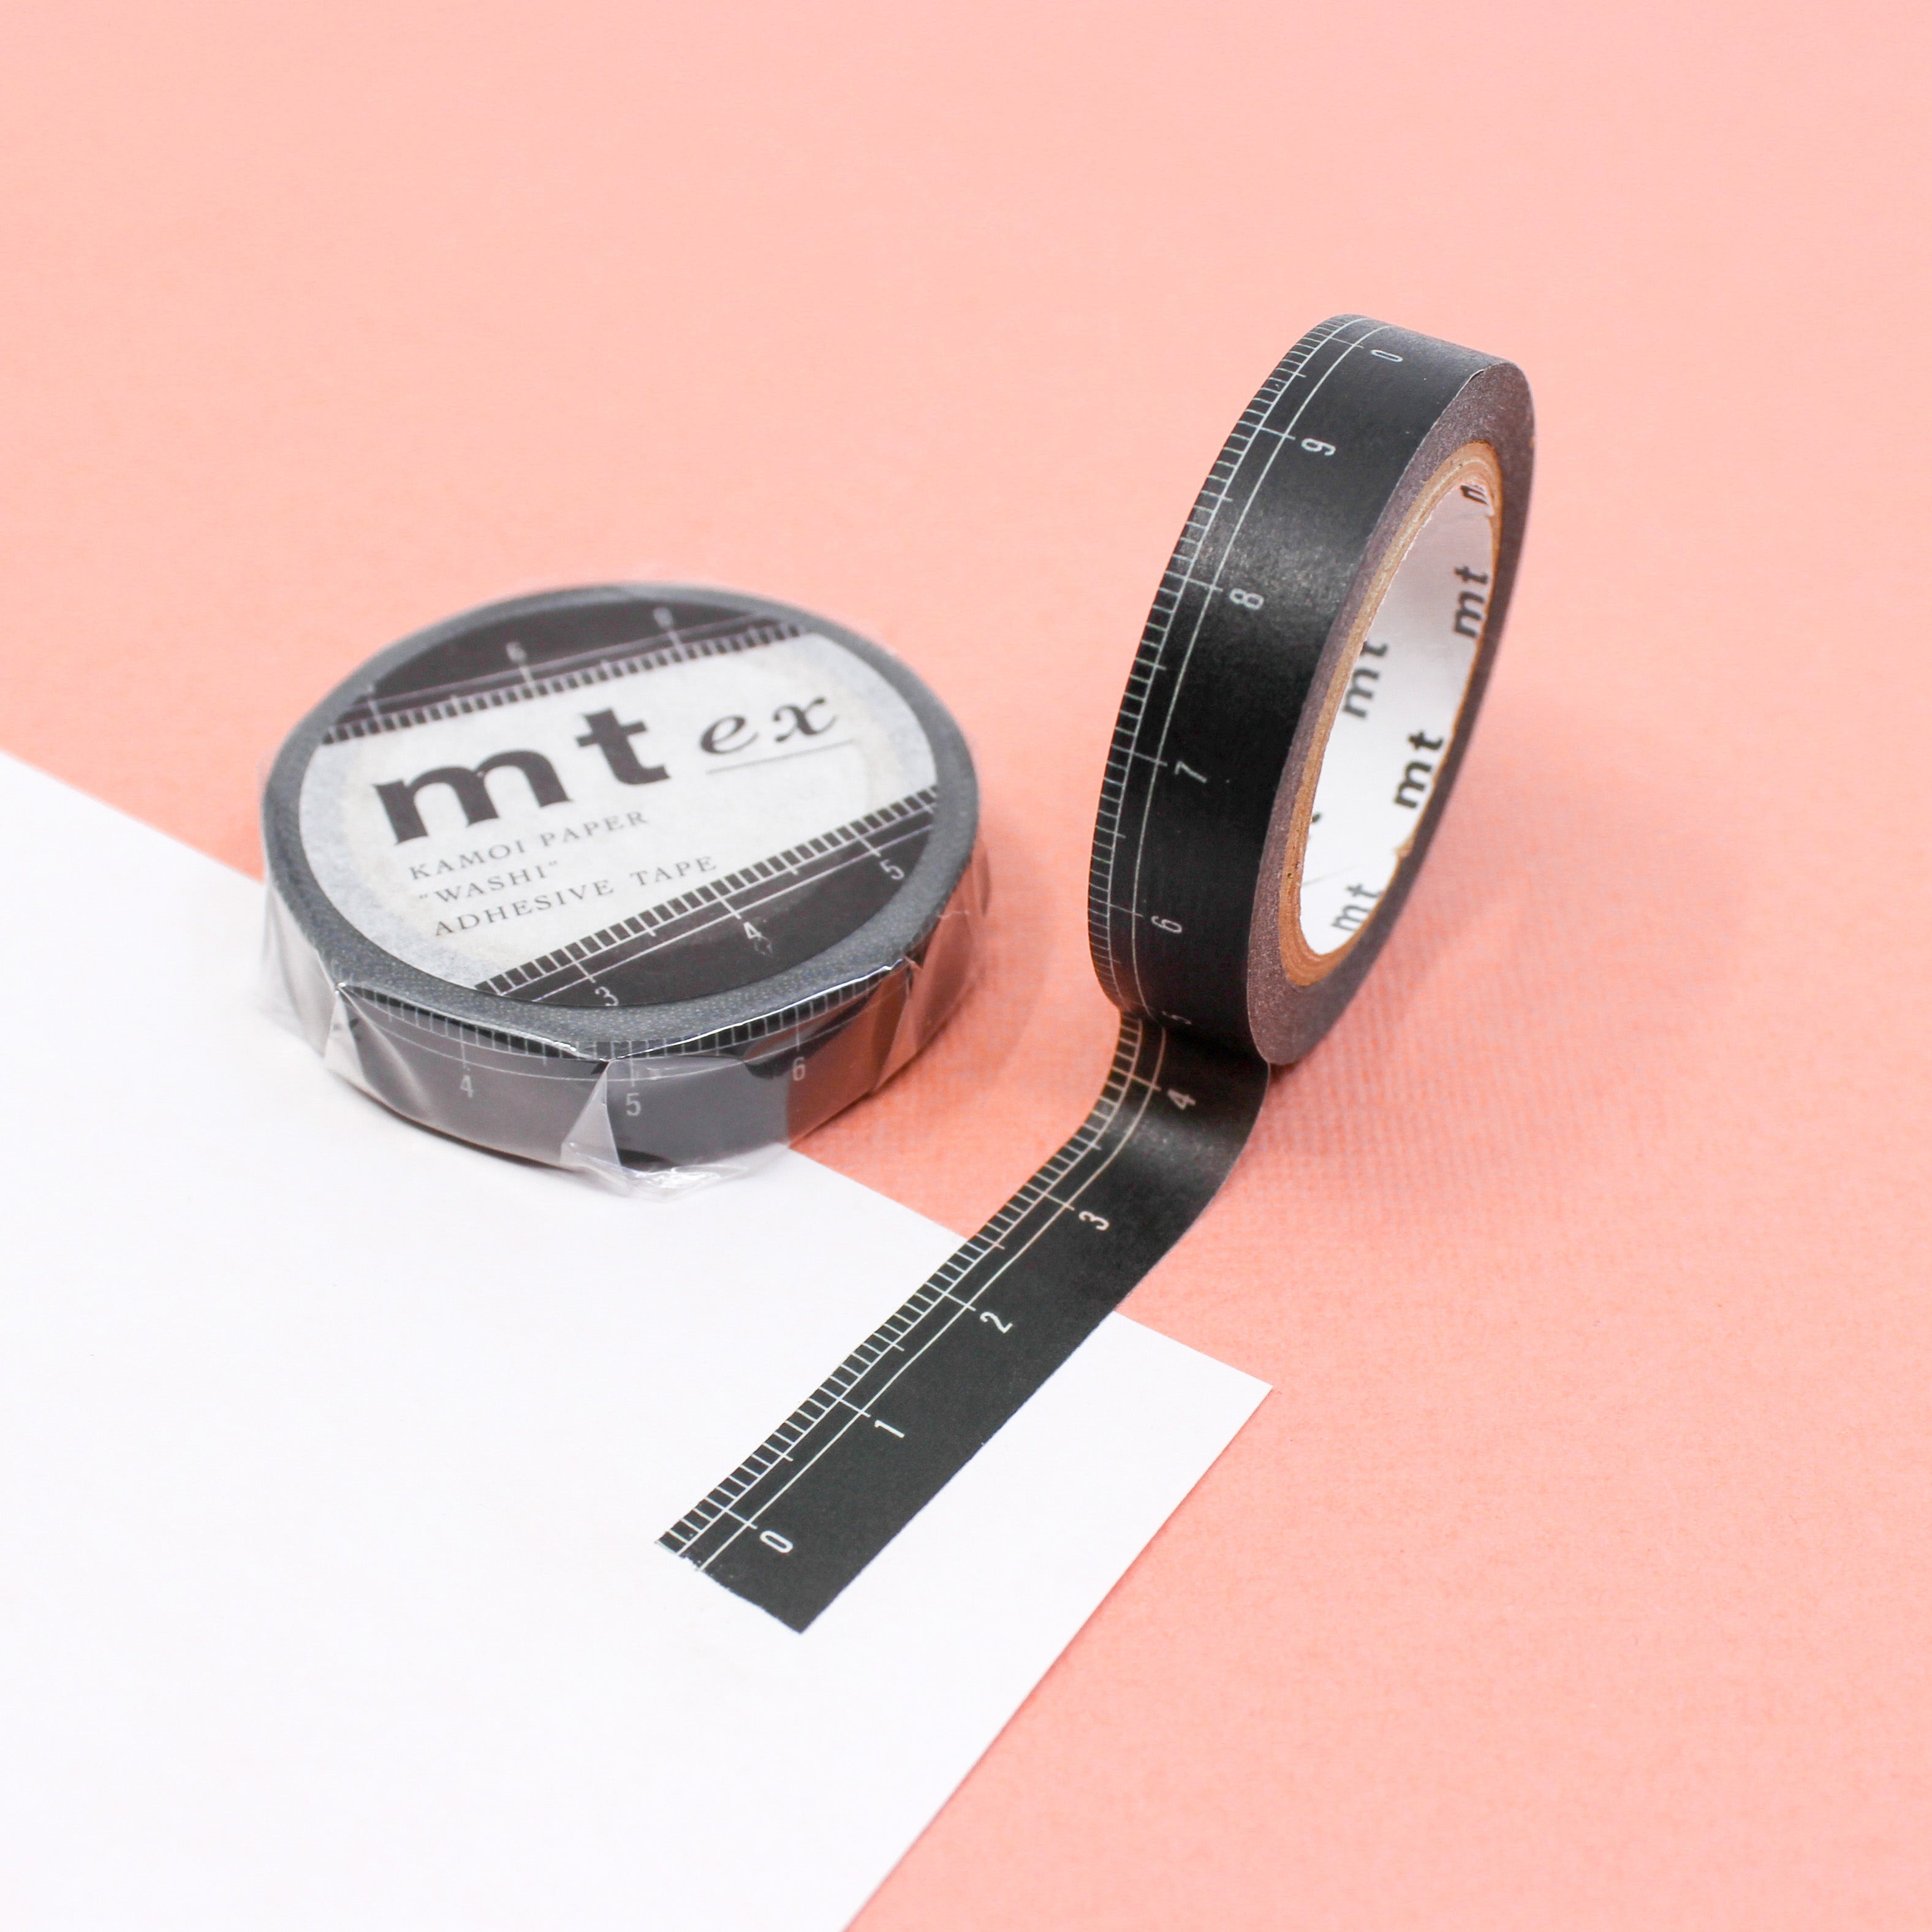 Stay organized with our thin black ruler washi tape, featuring a sleek design that mimics the appearance of a ruler, perfect for adding a practical and minimalist touch to your crafts. This tape is from MT Brand Washi tape and sold at BBB Supplies Craft Shop.